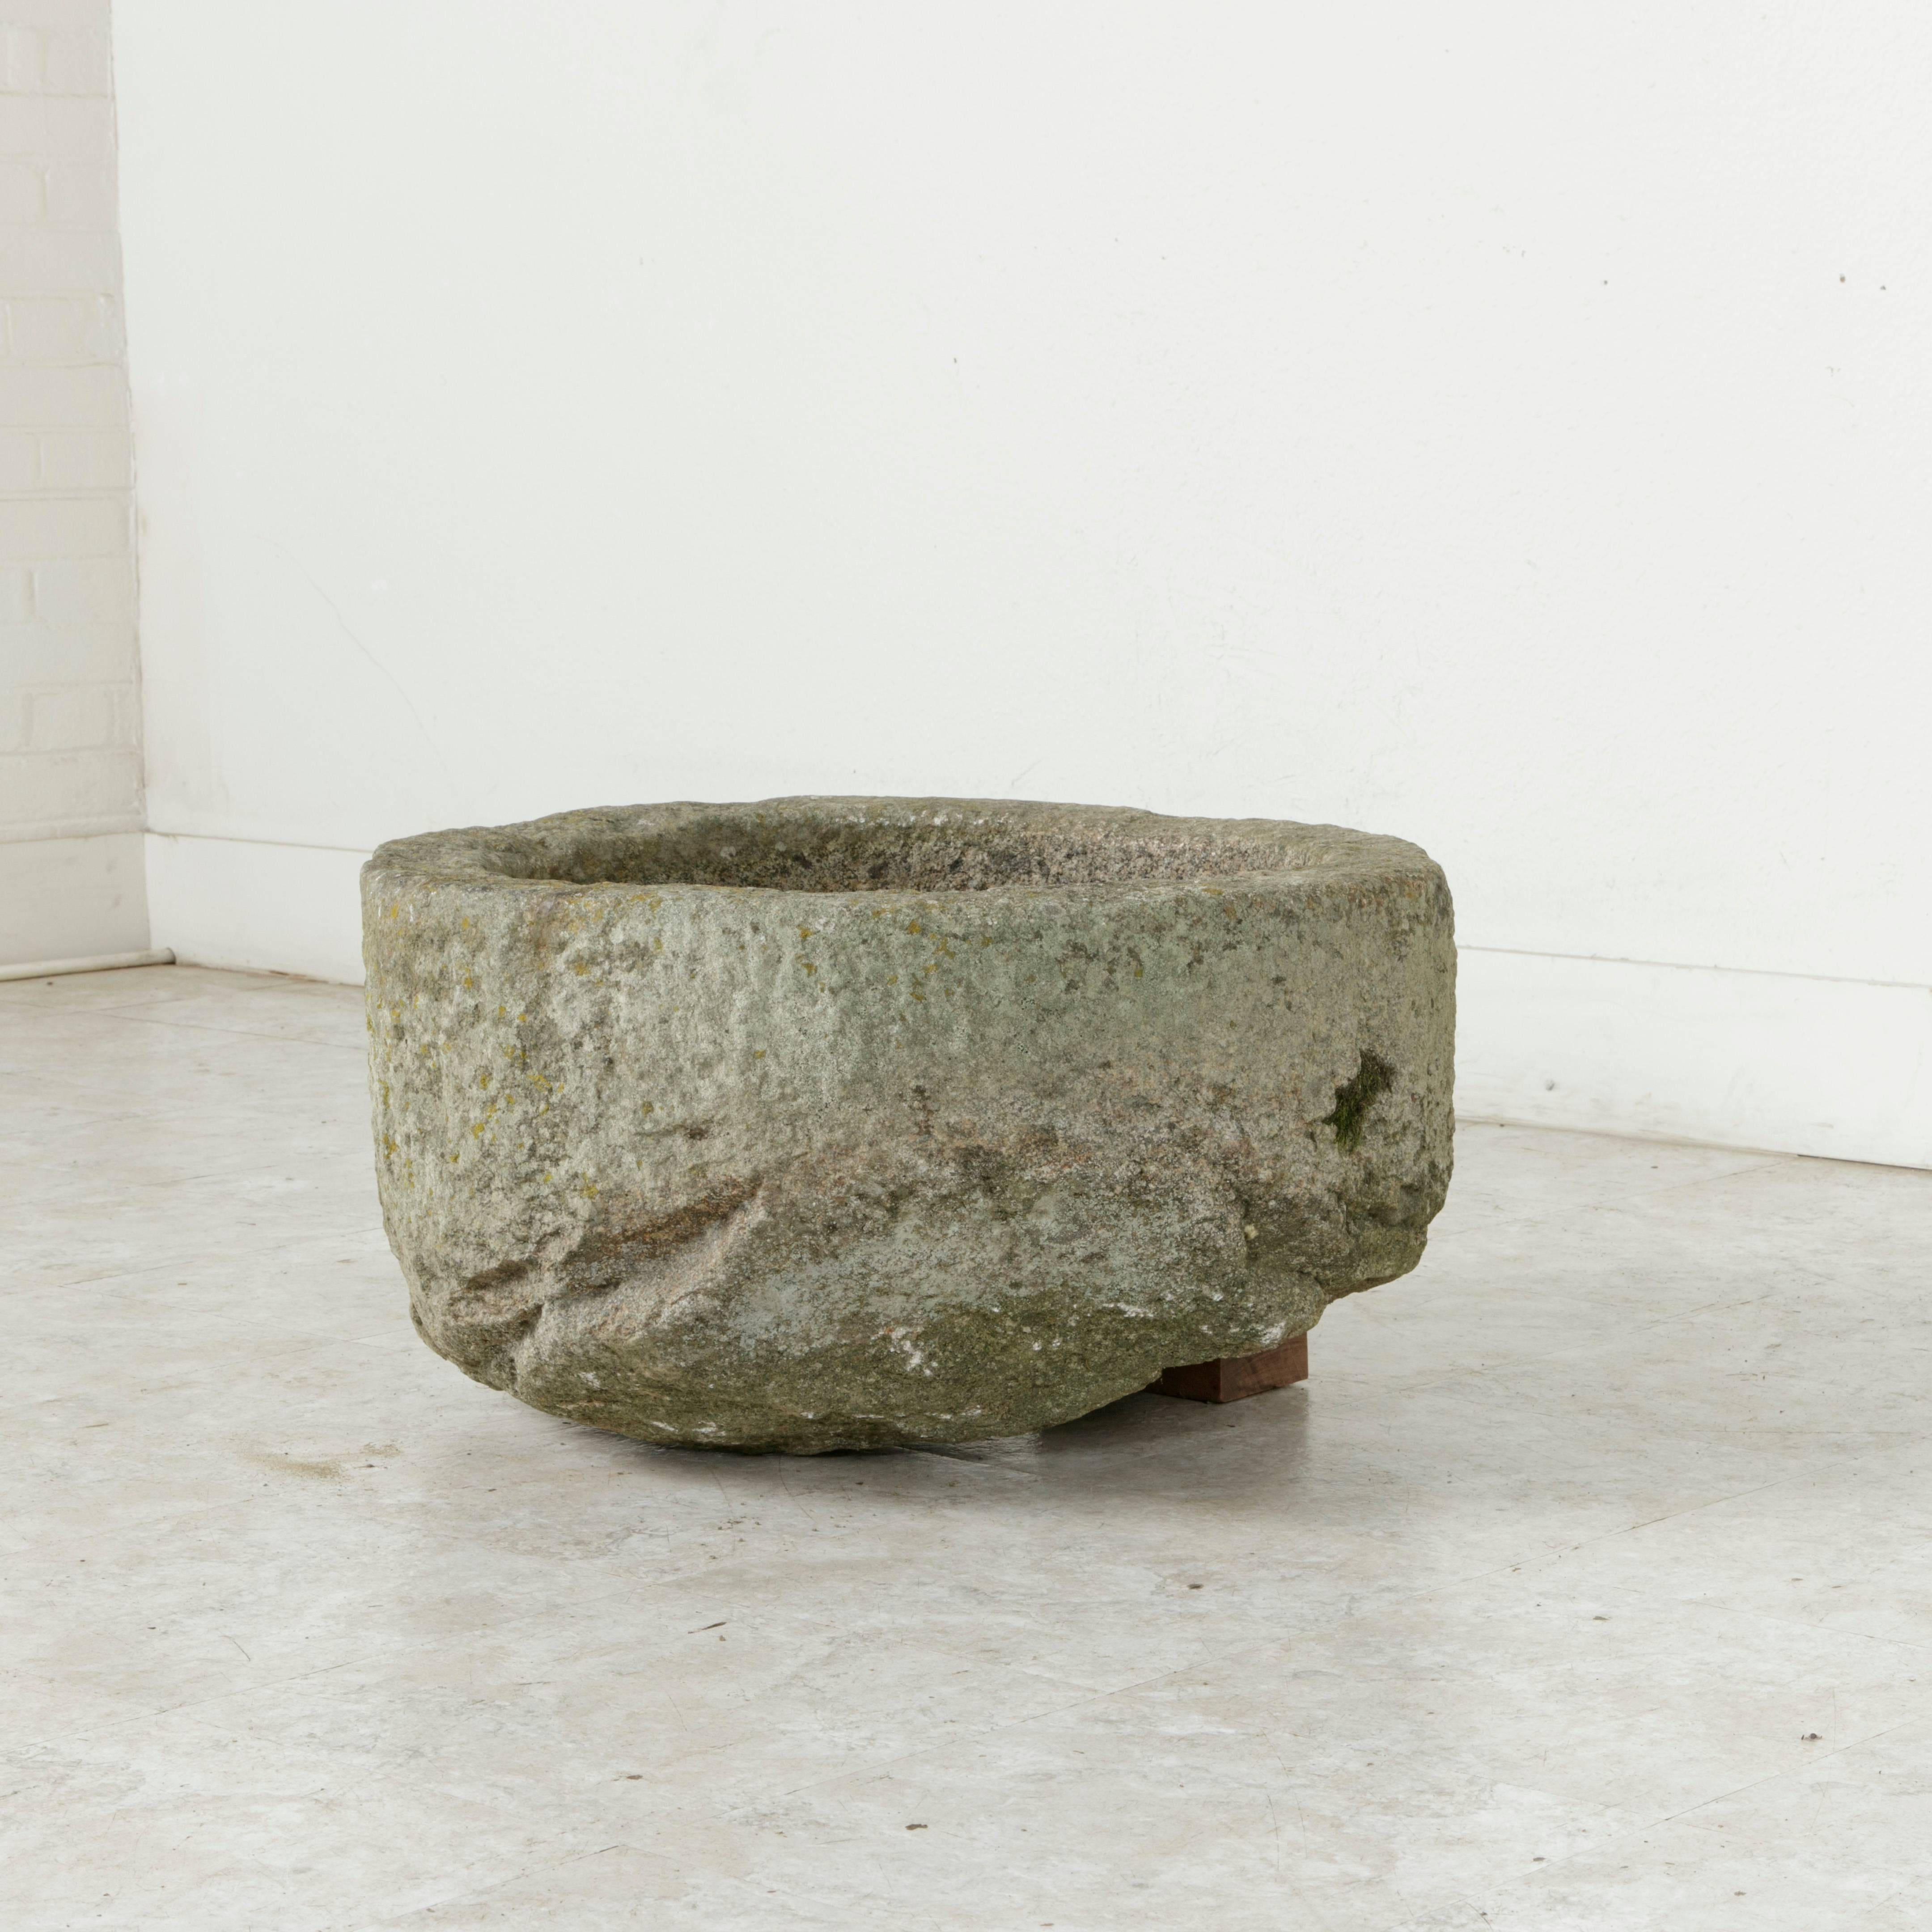 Found in Normandy, France, this hand-cut stone auge, or trough from the 19th century was originally used to feed or water farm animals. Rare for its round shape and seven inch deep basin, this piece would be ideal as a planter, fountain basin, or a